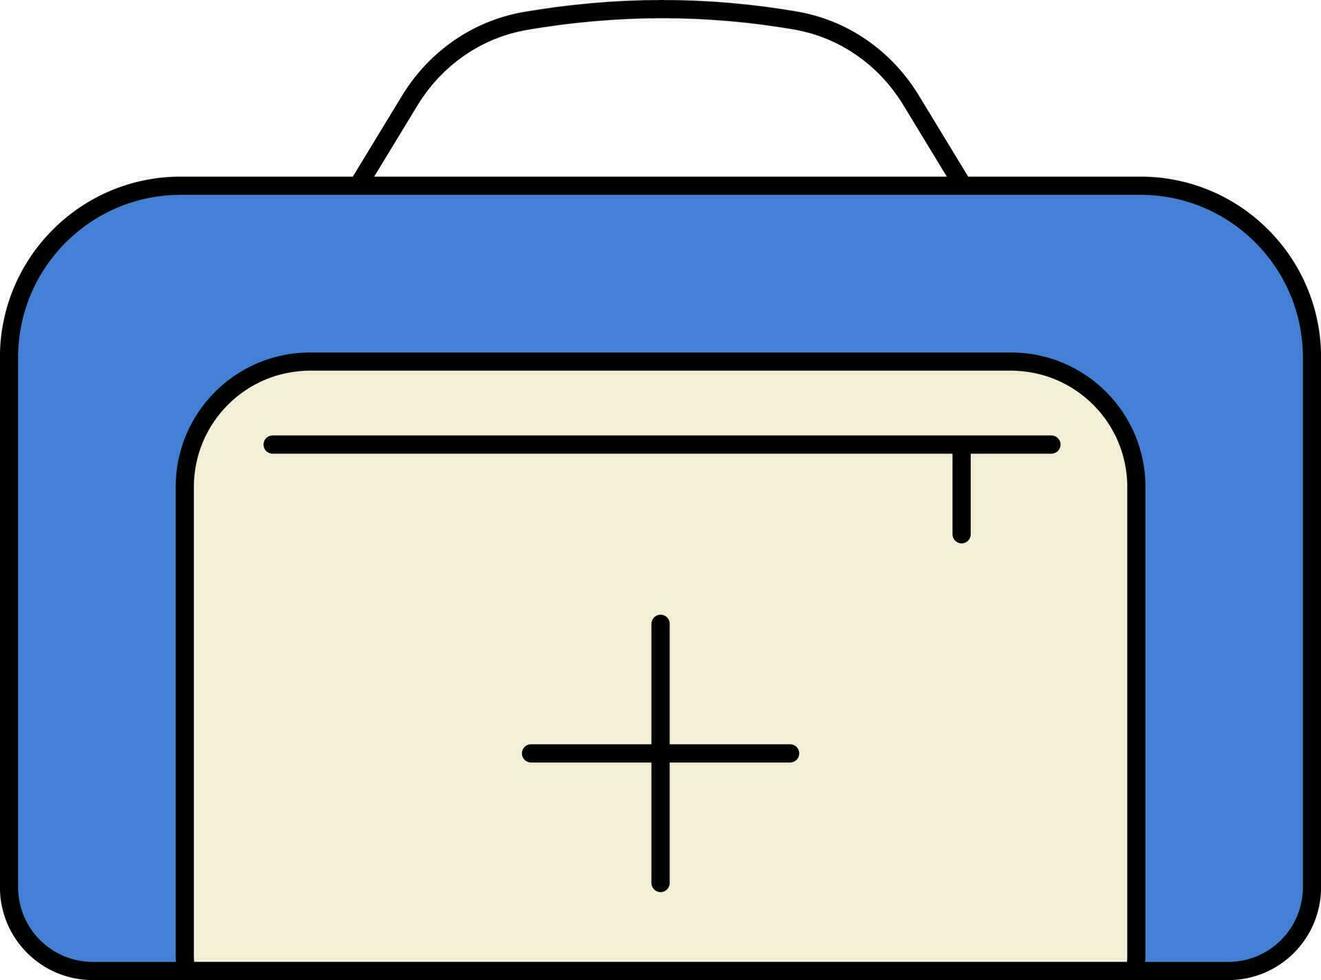 First Aid Kit Or Handbag Icon In Blue And Beige Color. vector